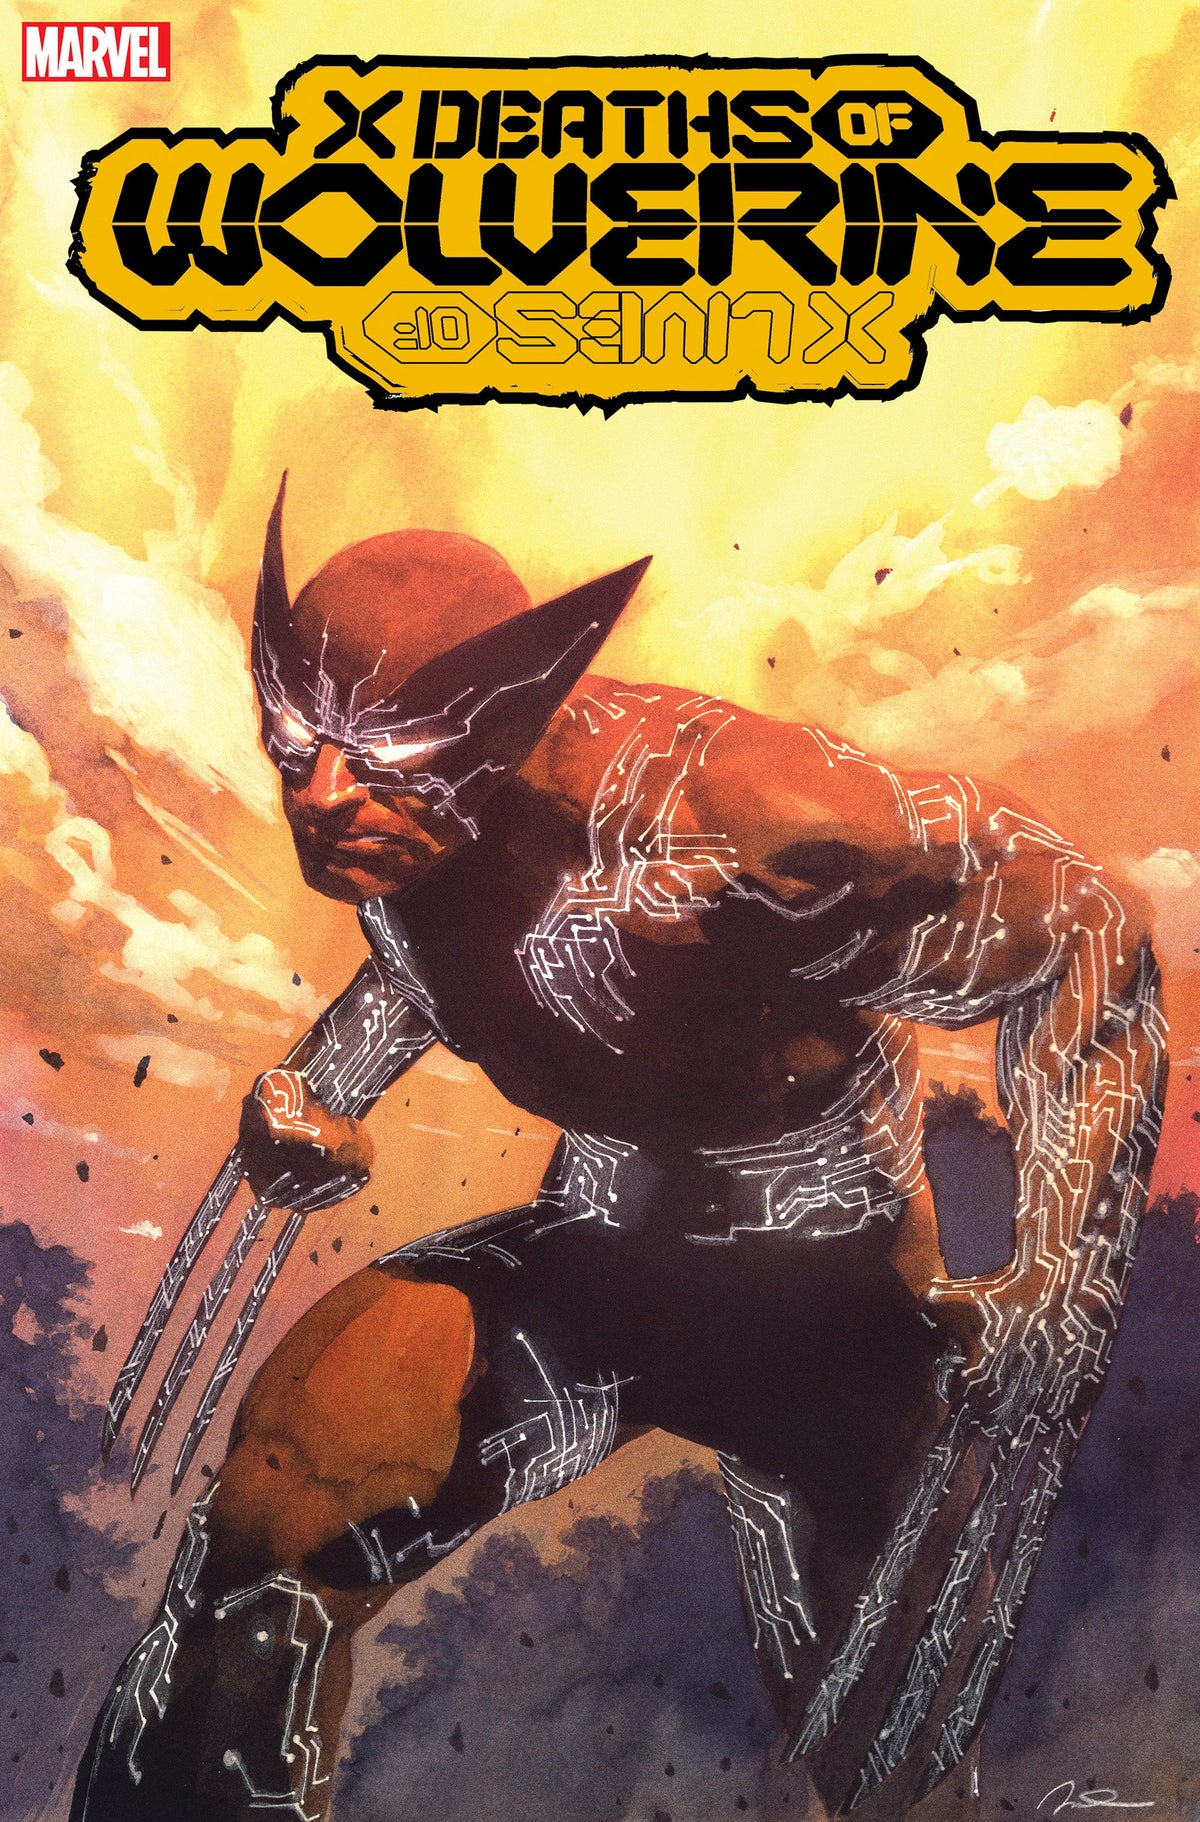 Image of X Deaths of Wolverine 1 Parel Variant comic sold by Stronghold Collectibles.